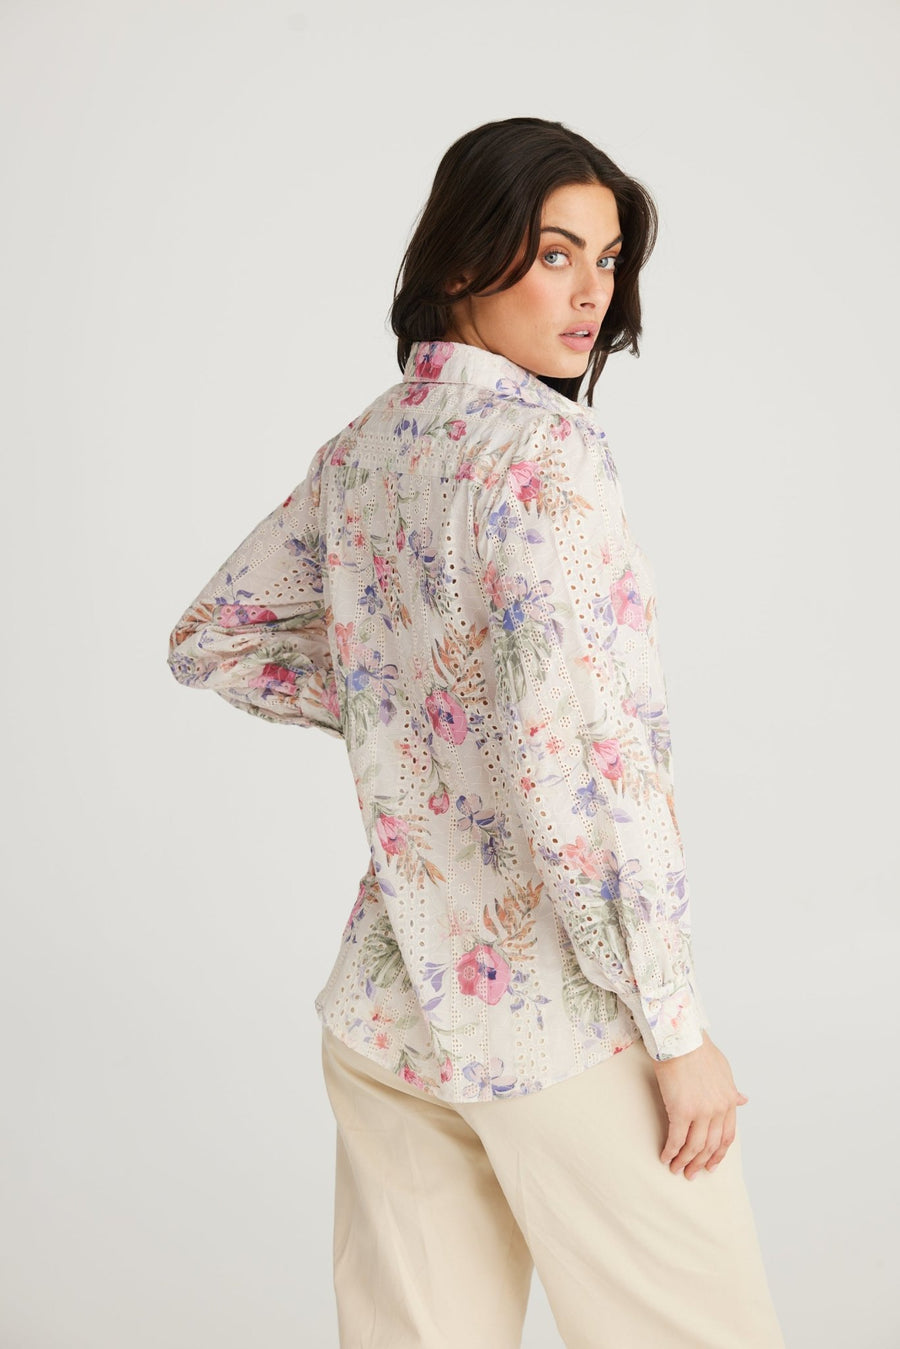 Flower Child Shirt Floral Broderie - Kohl and Soda